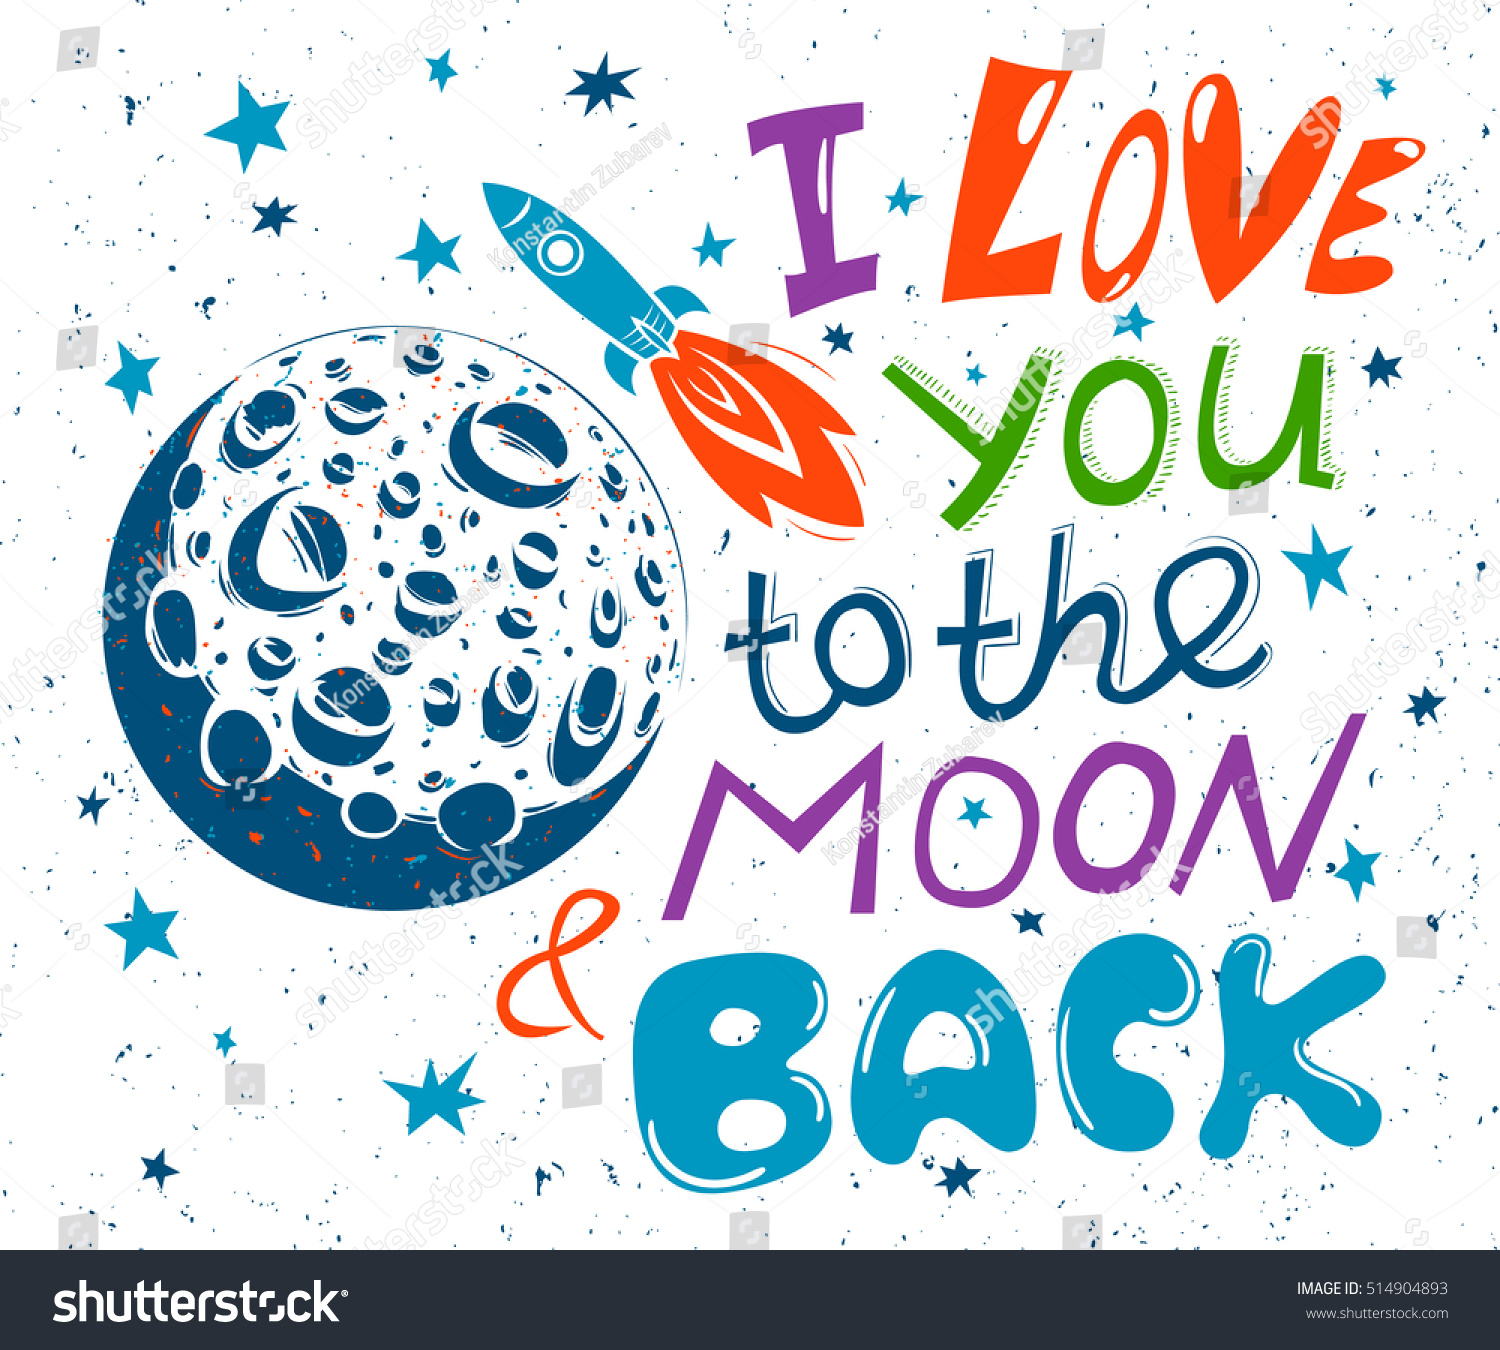 I love you to the moon and back Hand drawn typography poster Vector illustration